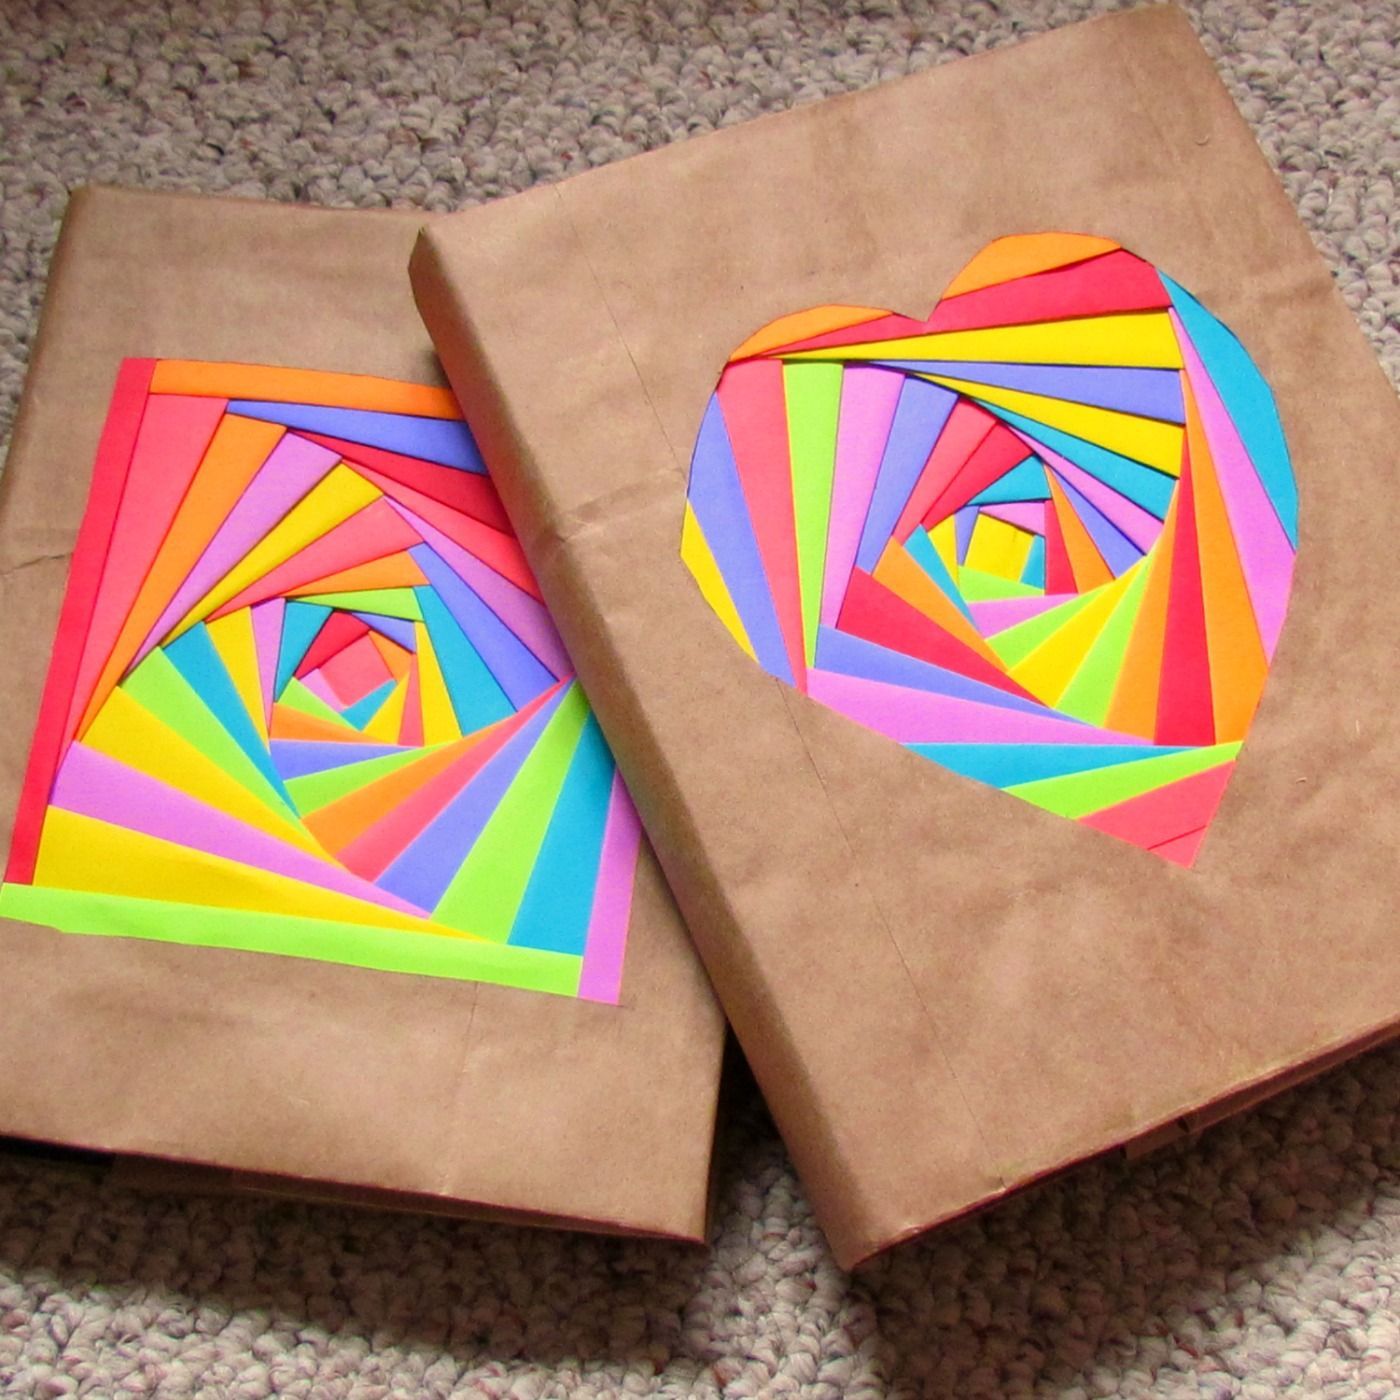 Creating colorful bookcovers with AstroBrights Paper!  ~~~This is a revamp the old version of the book cover.  You know, the one that is made from a grocery bag?  I used to make them all the time for